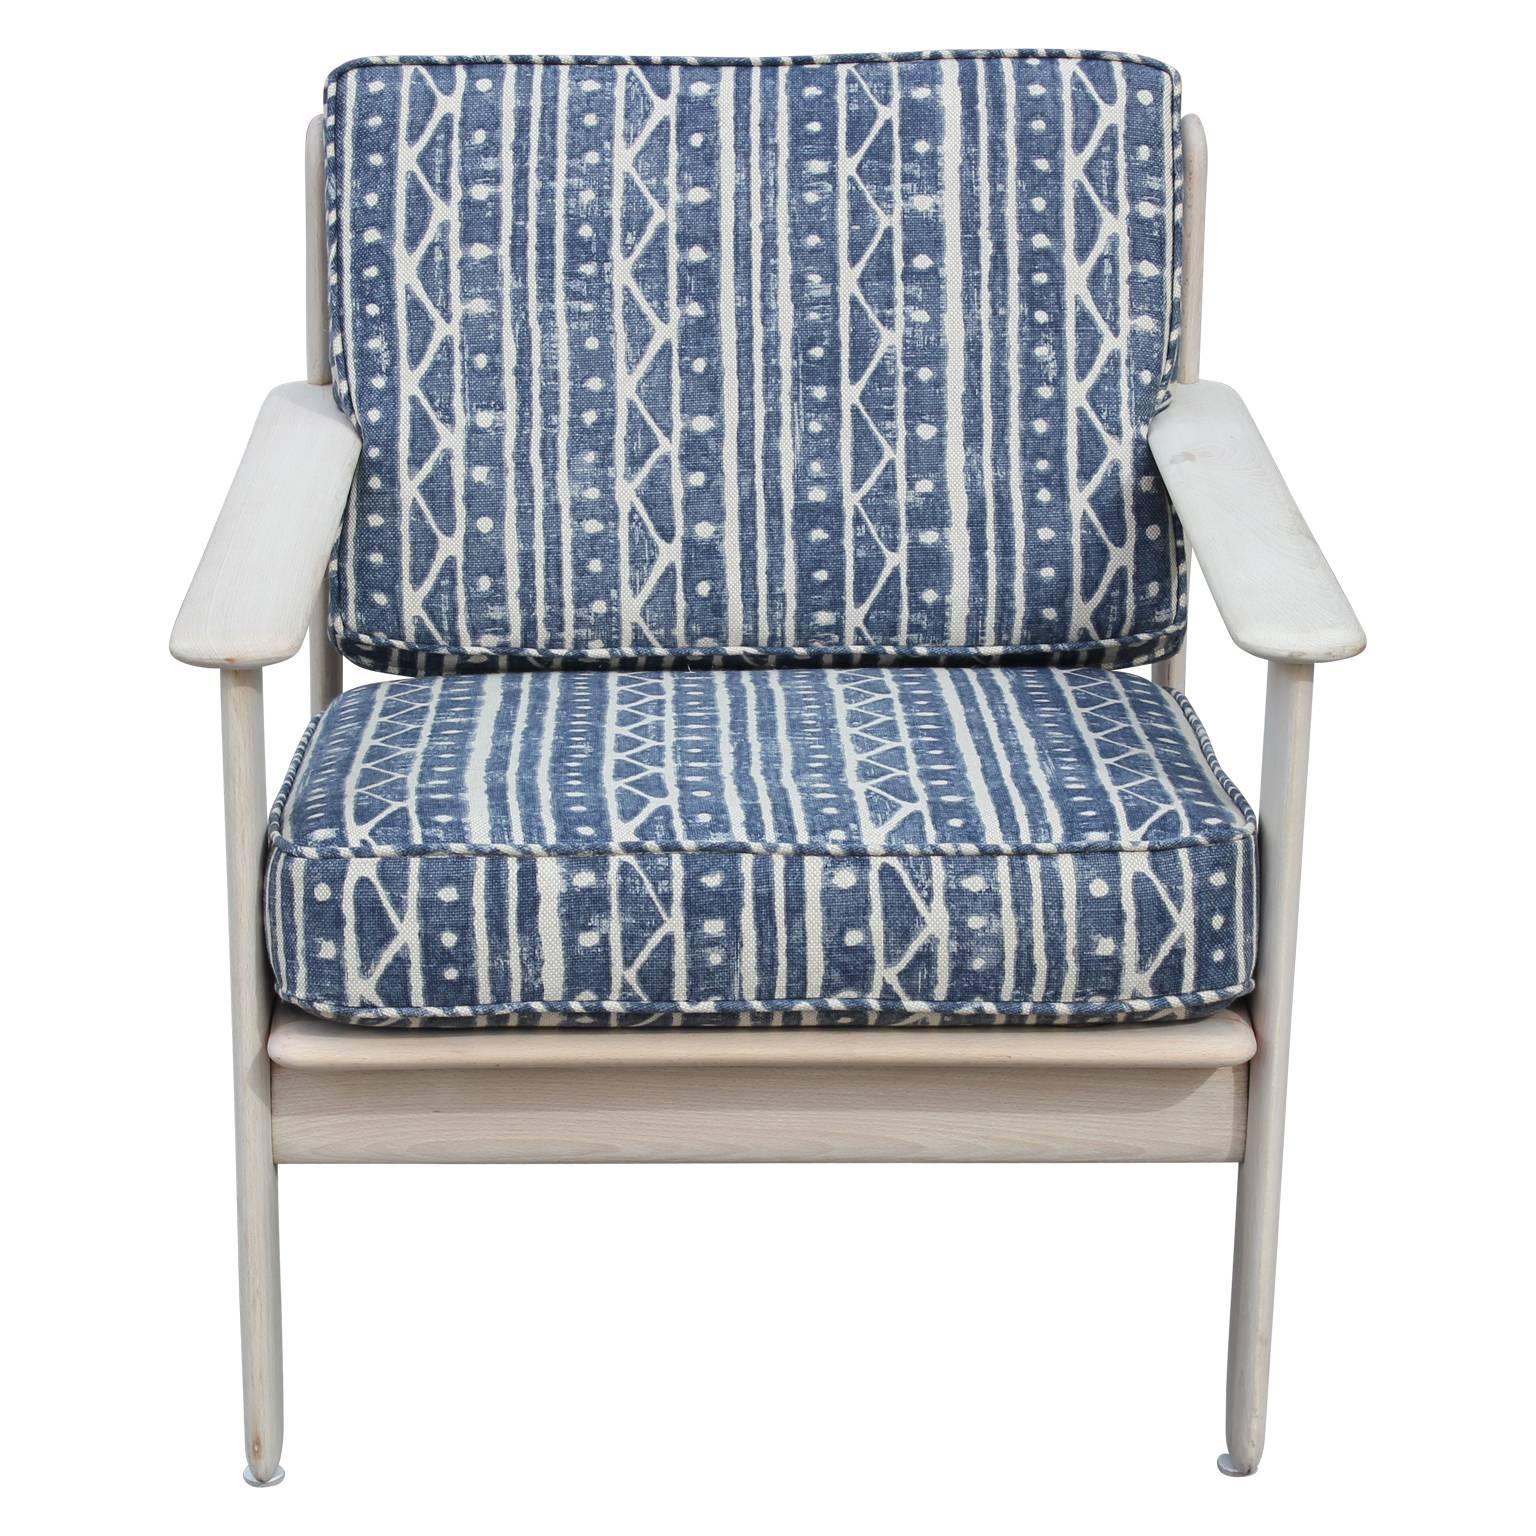 Cotton Pair of Modern Bleached Wood Italian Lounge Chairs in Indigo Blue & White Linen